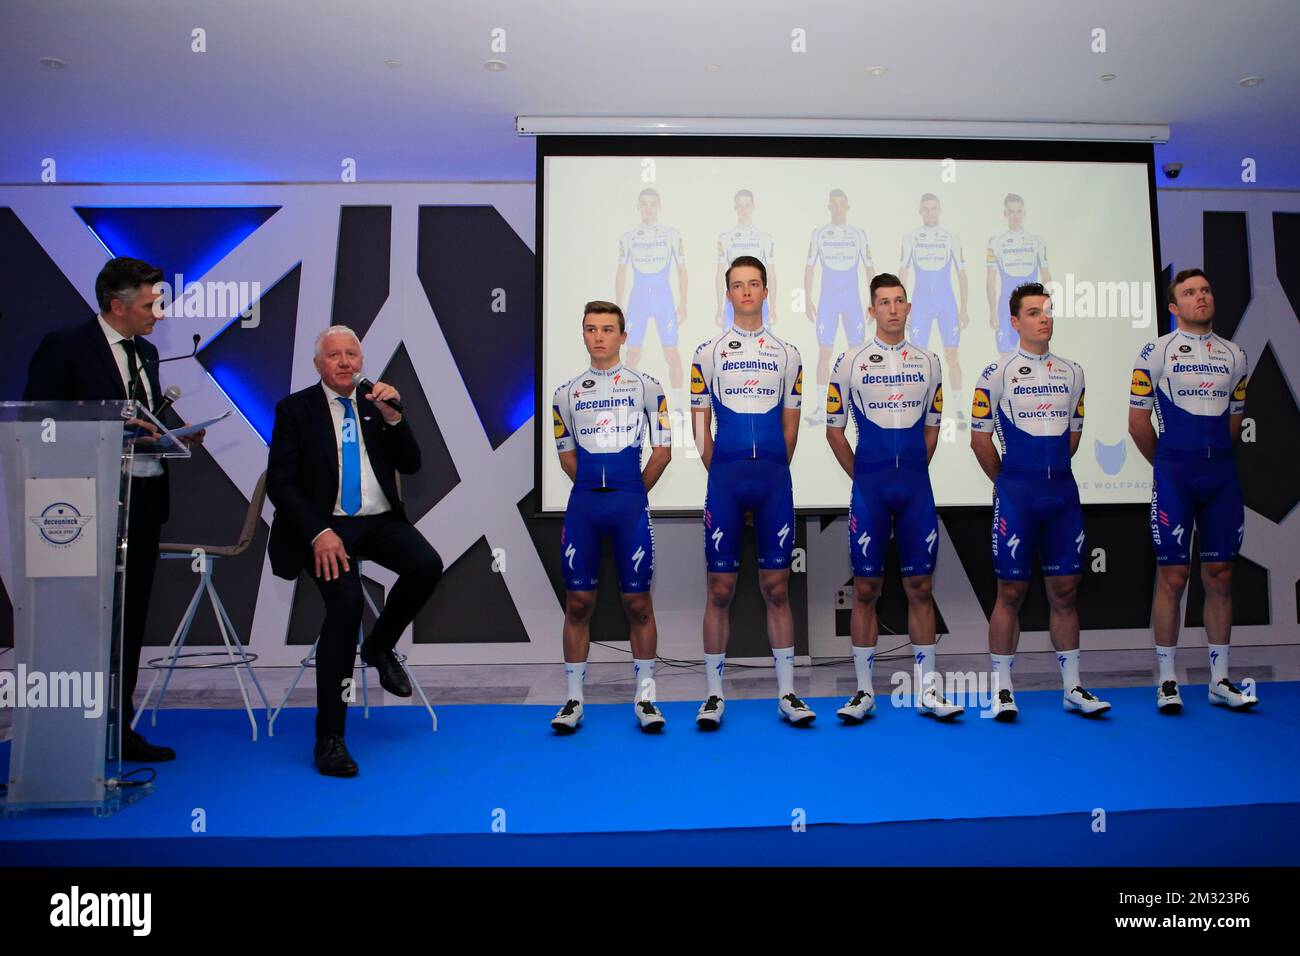 Deceuninck - Quick-Step riders pictured during the team presentation of  Belgian cycling team Deceuninck - Quick-Step in Calpe, Spain, Friday 10  January 2020. BELGA PHOTO JOMA Stock Photo - Alamy